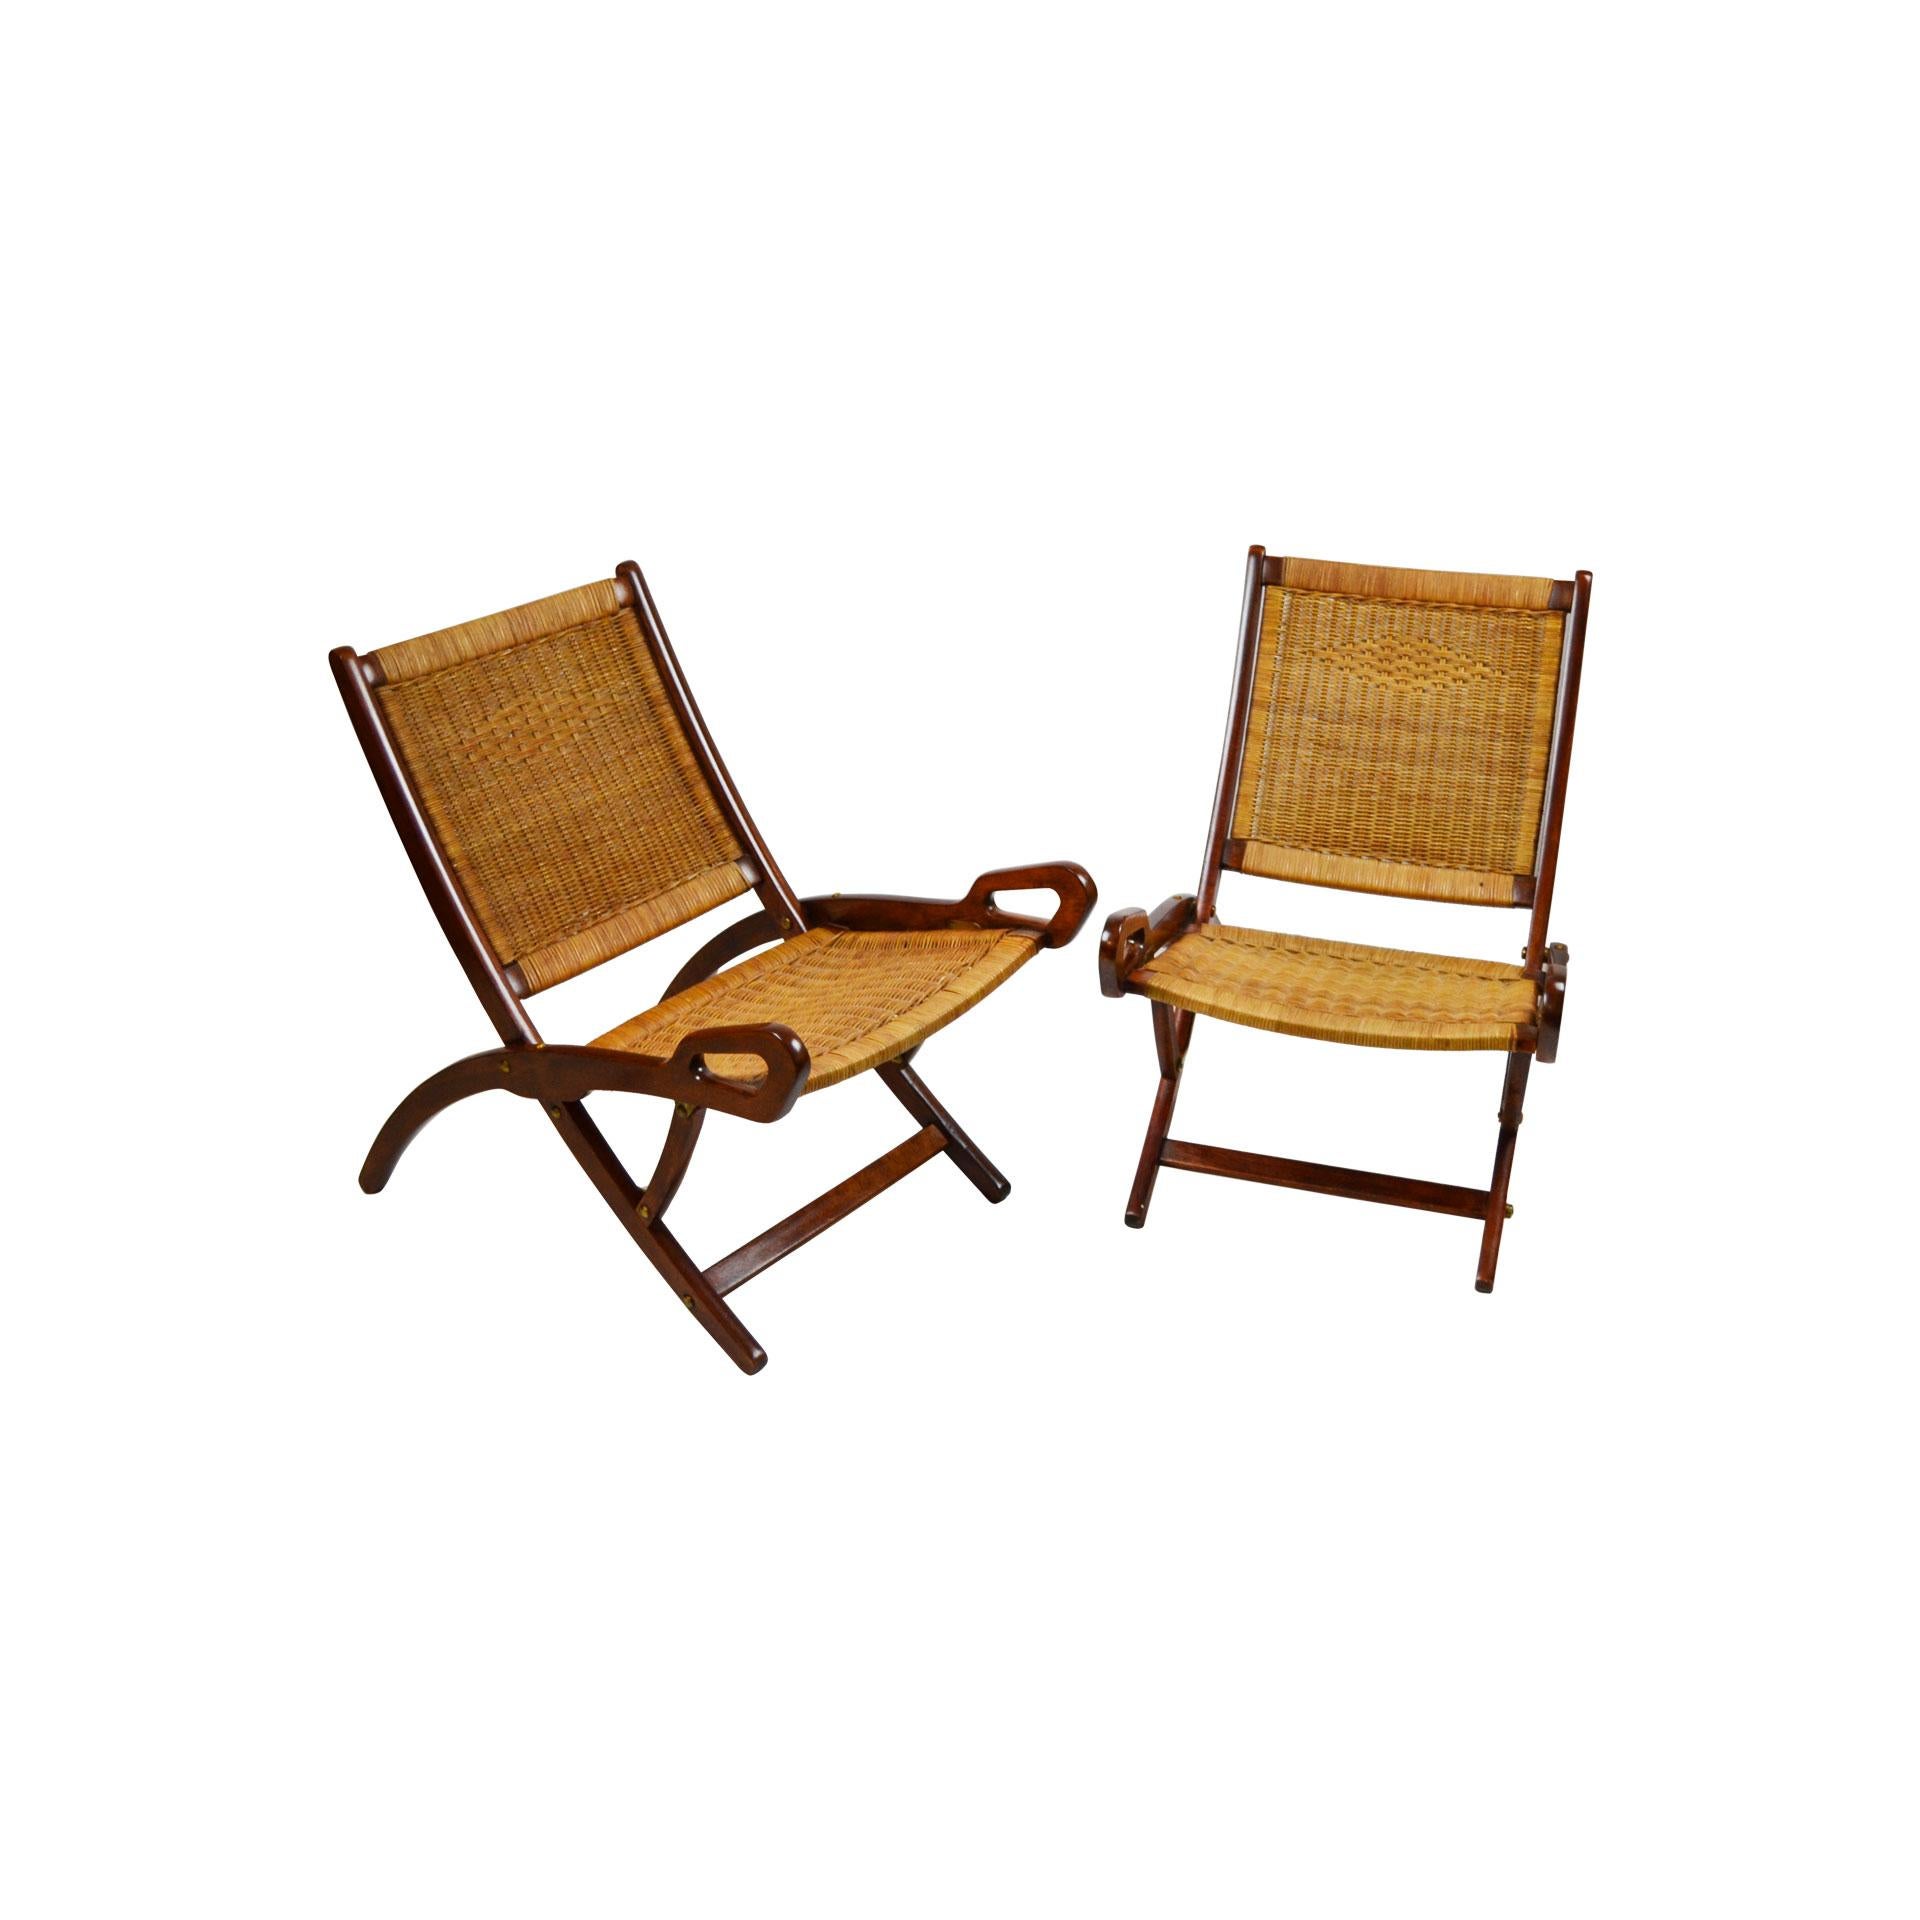 Pair of folding armchairs designed by Gio Ponti in 1950s for Brothers Reguitti Production. The two armchairs have a wood structure and the seat and backrest in woven rush, details in brass. Very good condition.
Presence of the brandmark 